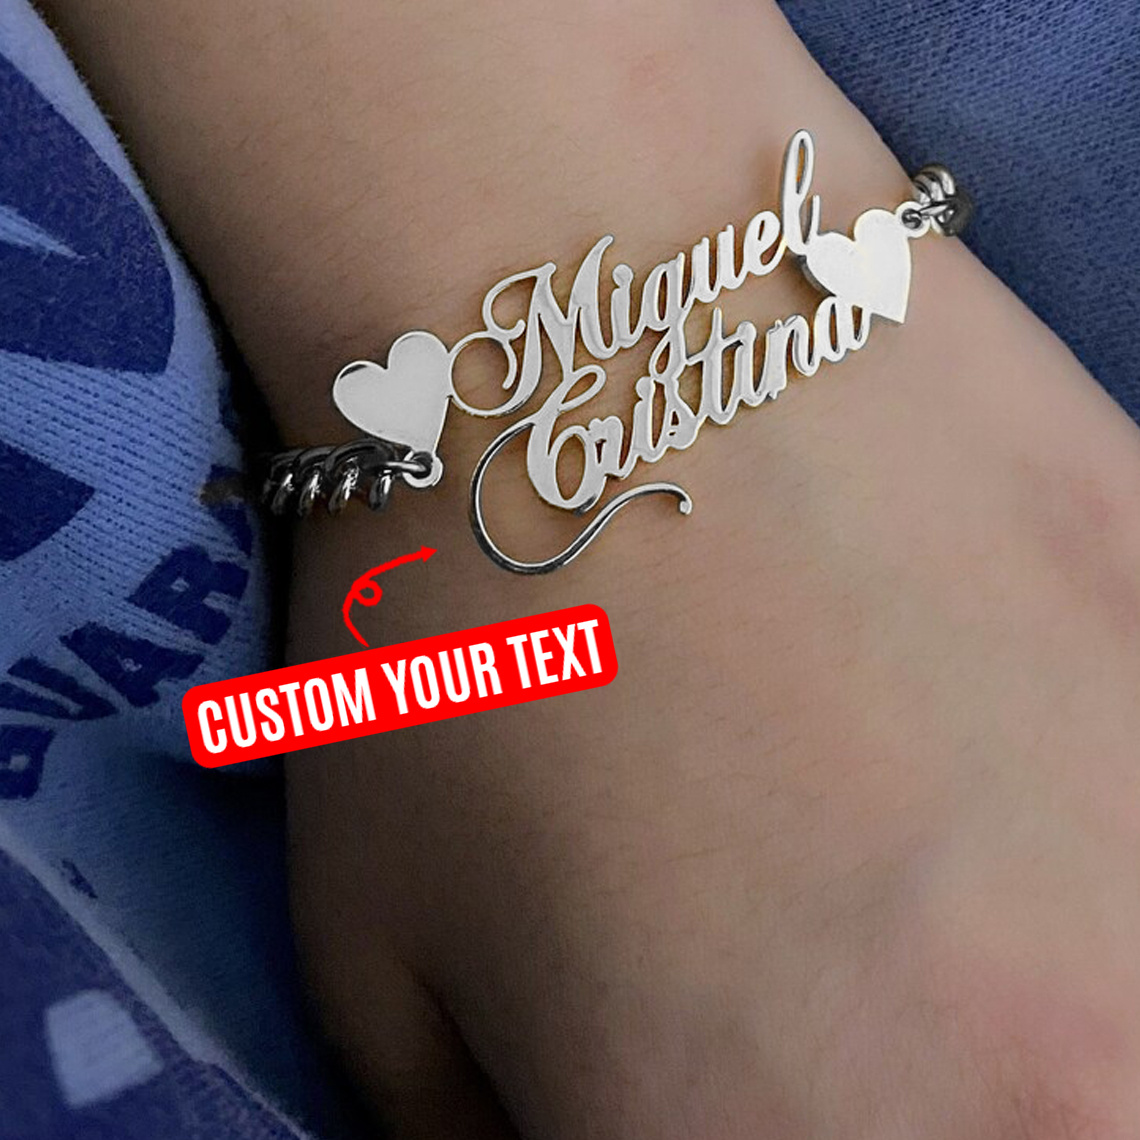 

Customized Name Bracelet Made Of 304 Stainless Steel Just Send Us The Content ( Within 12 Characters, English Only ) Your Will Get Your Personalized Jewelry